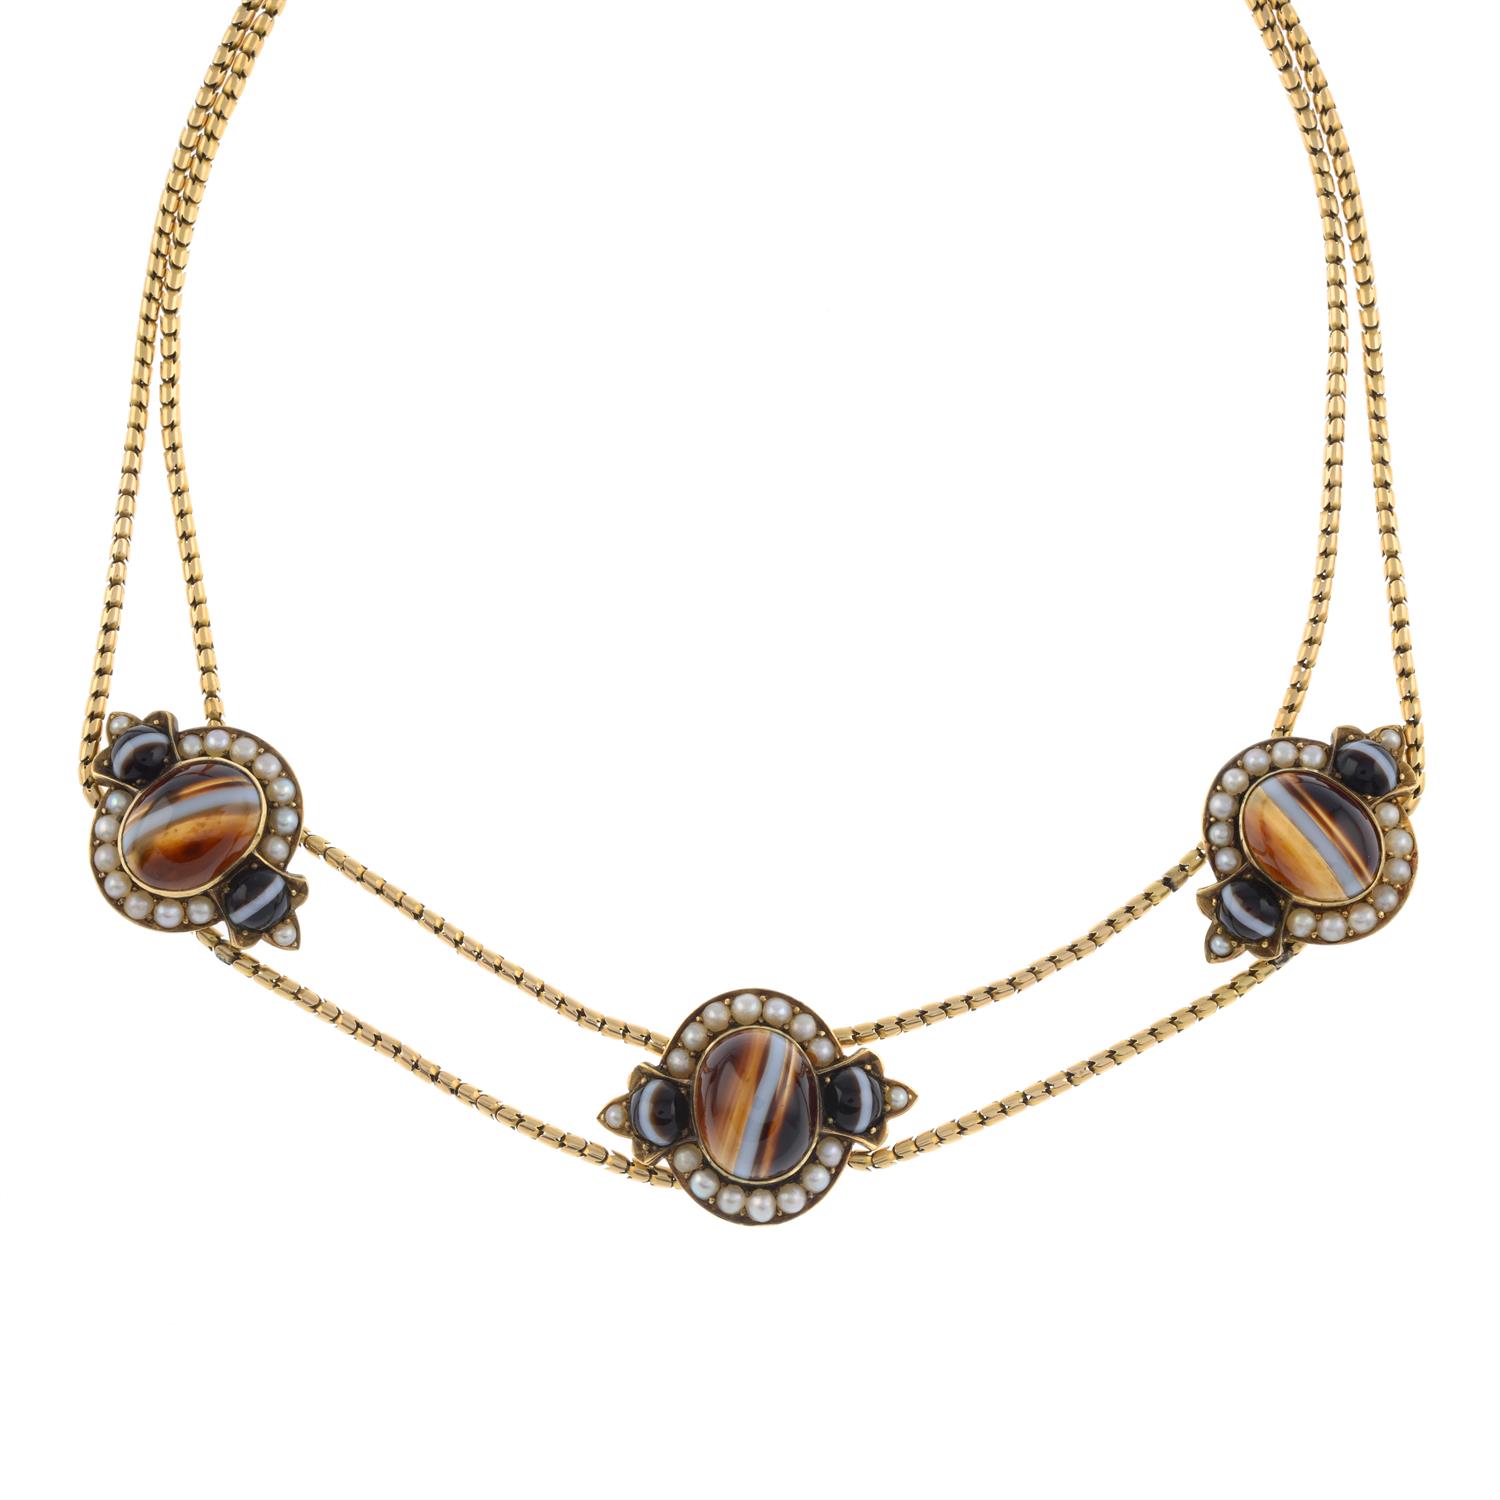 Victorian gold agate and split pearl necklace - Image 3 of 4